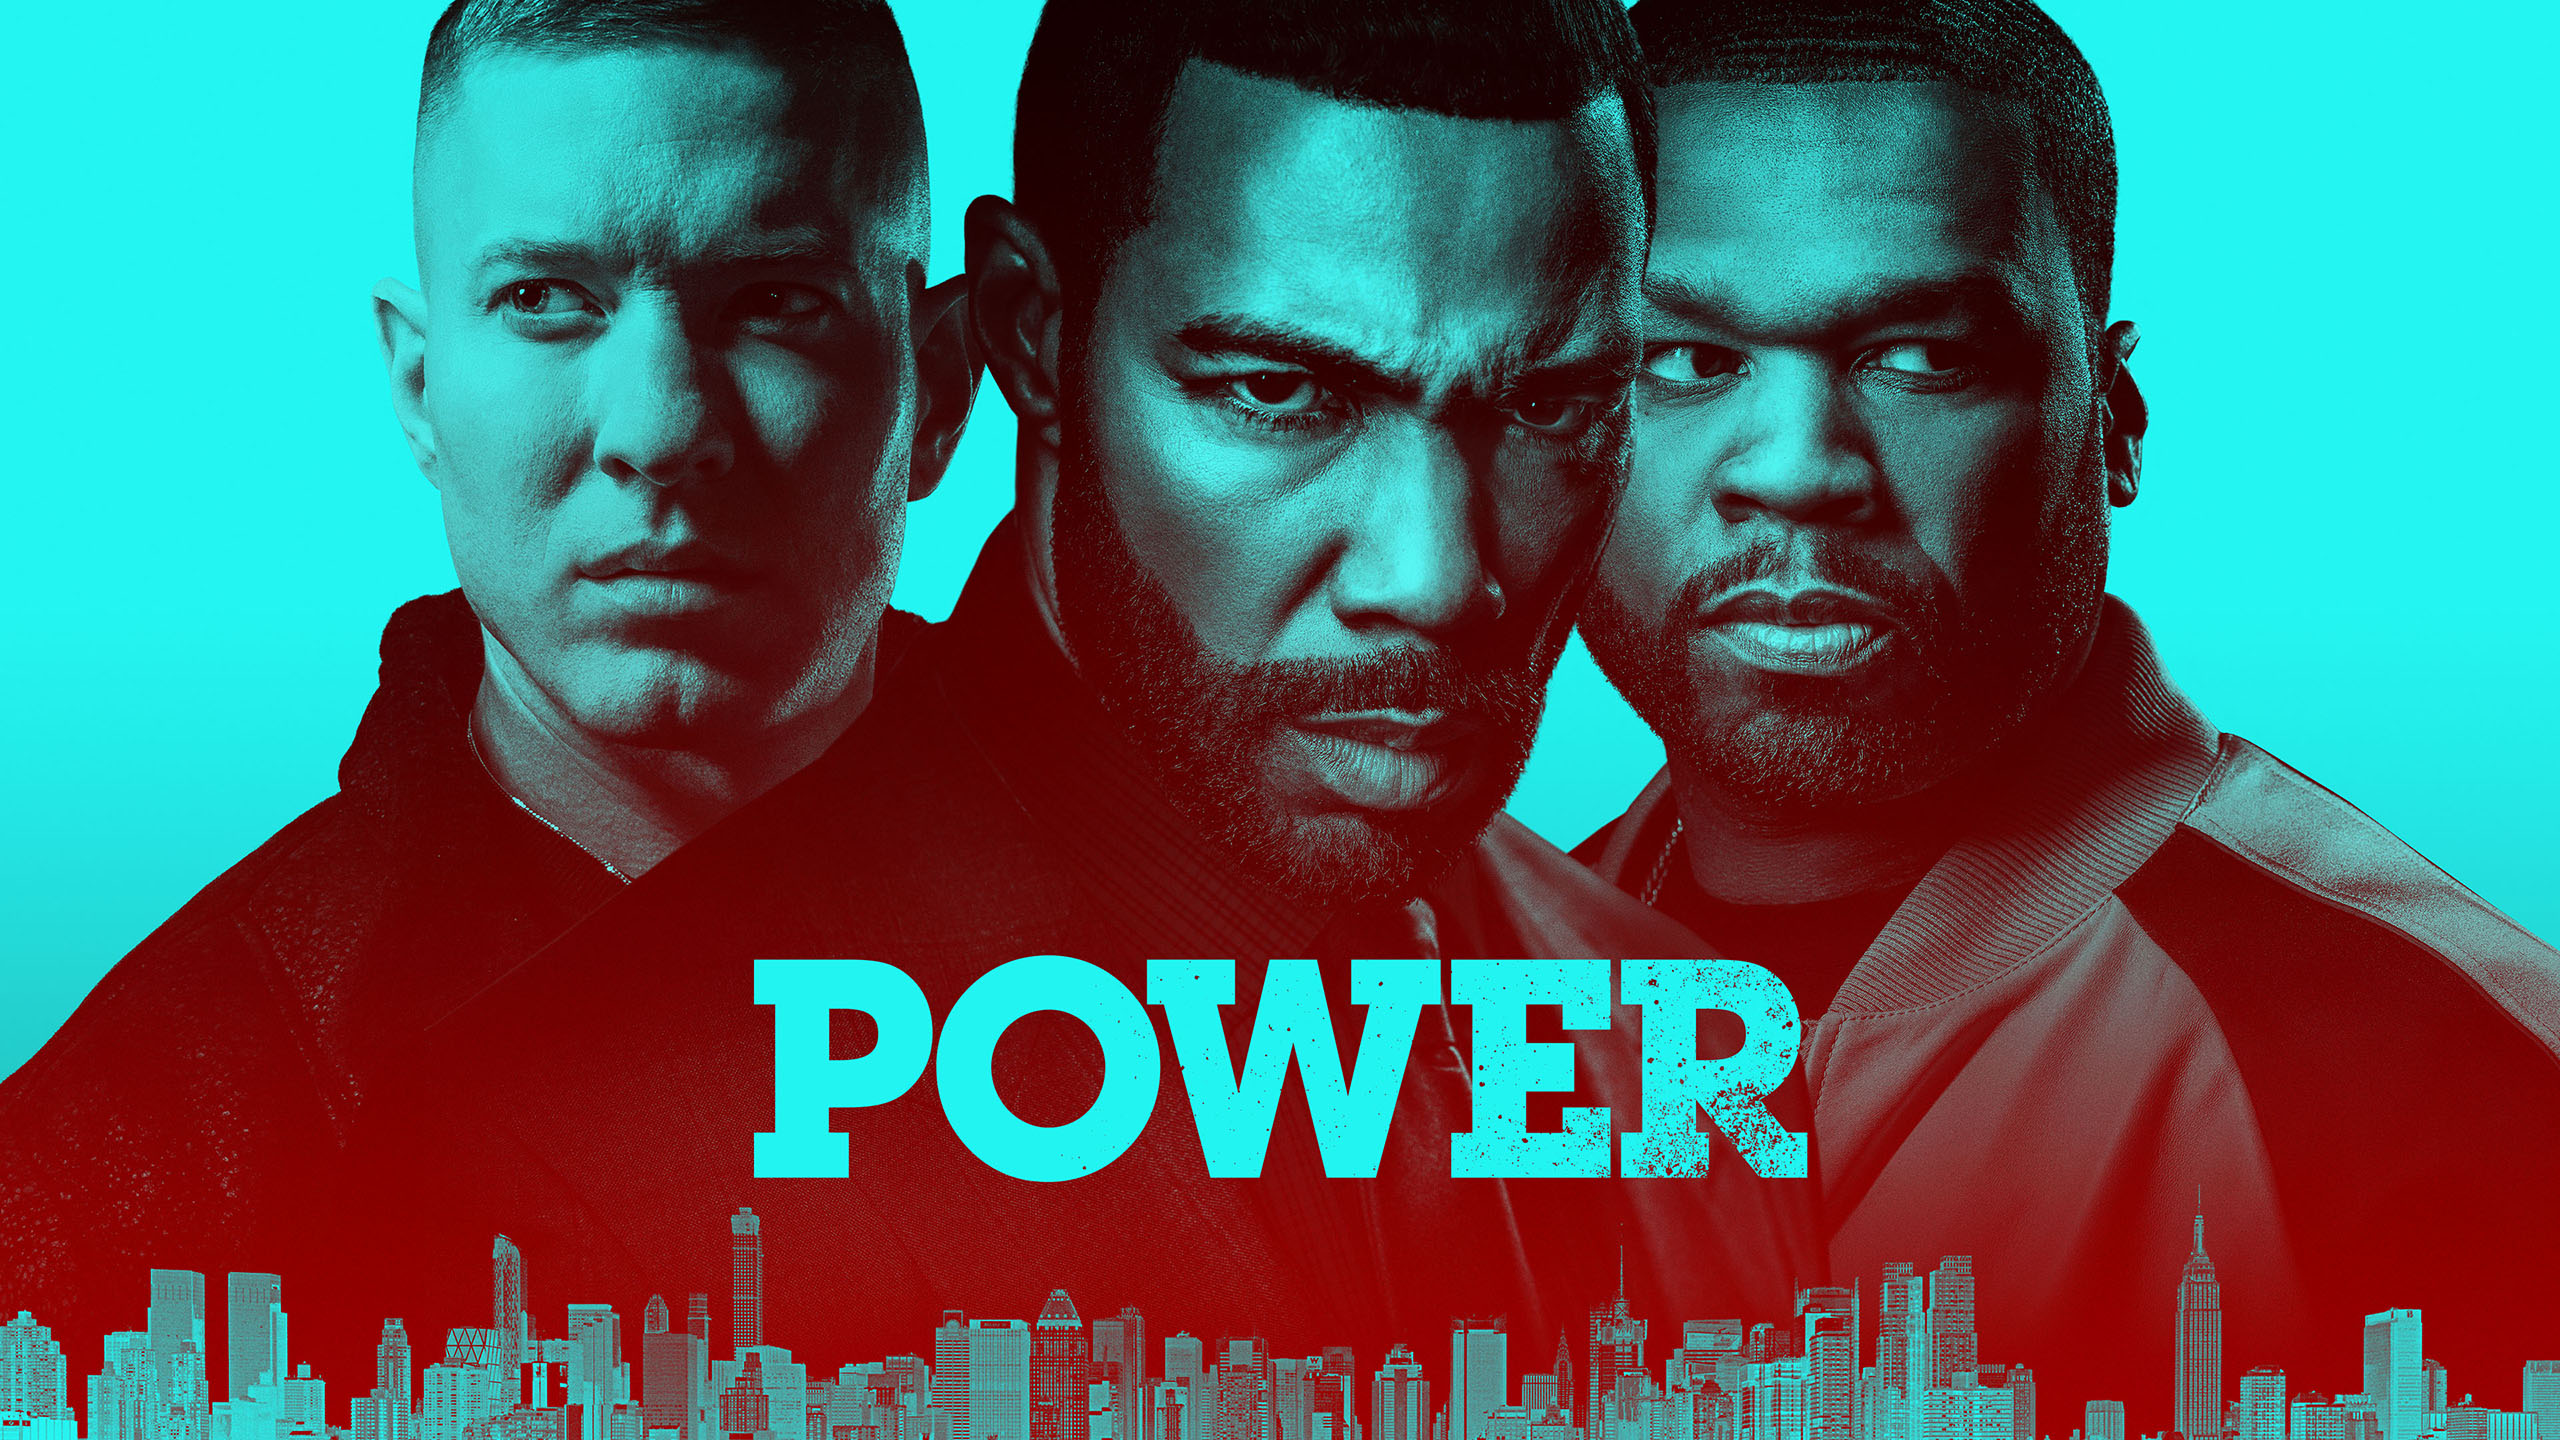 Power season 6 release date, cast and everything you need to know